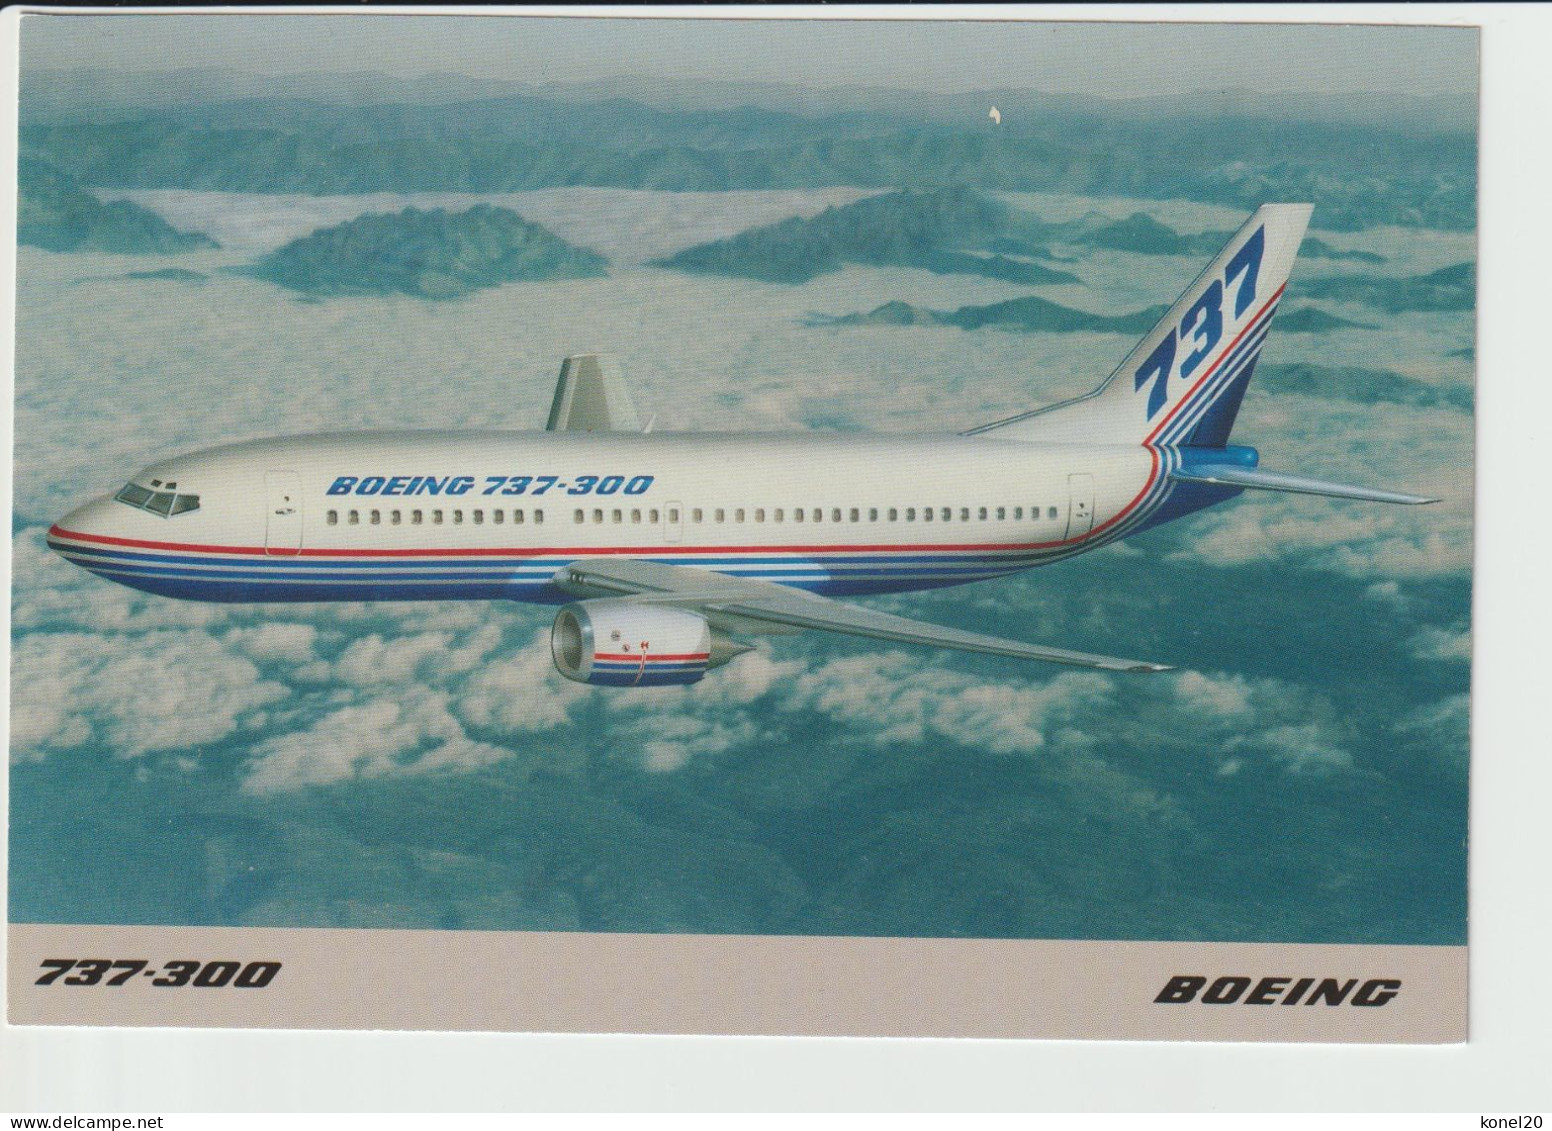 Vintage Pc Boeing 737- 400 Jetliner Aircraft In Company Colours - 1946-....: Modern Era